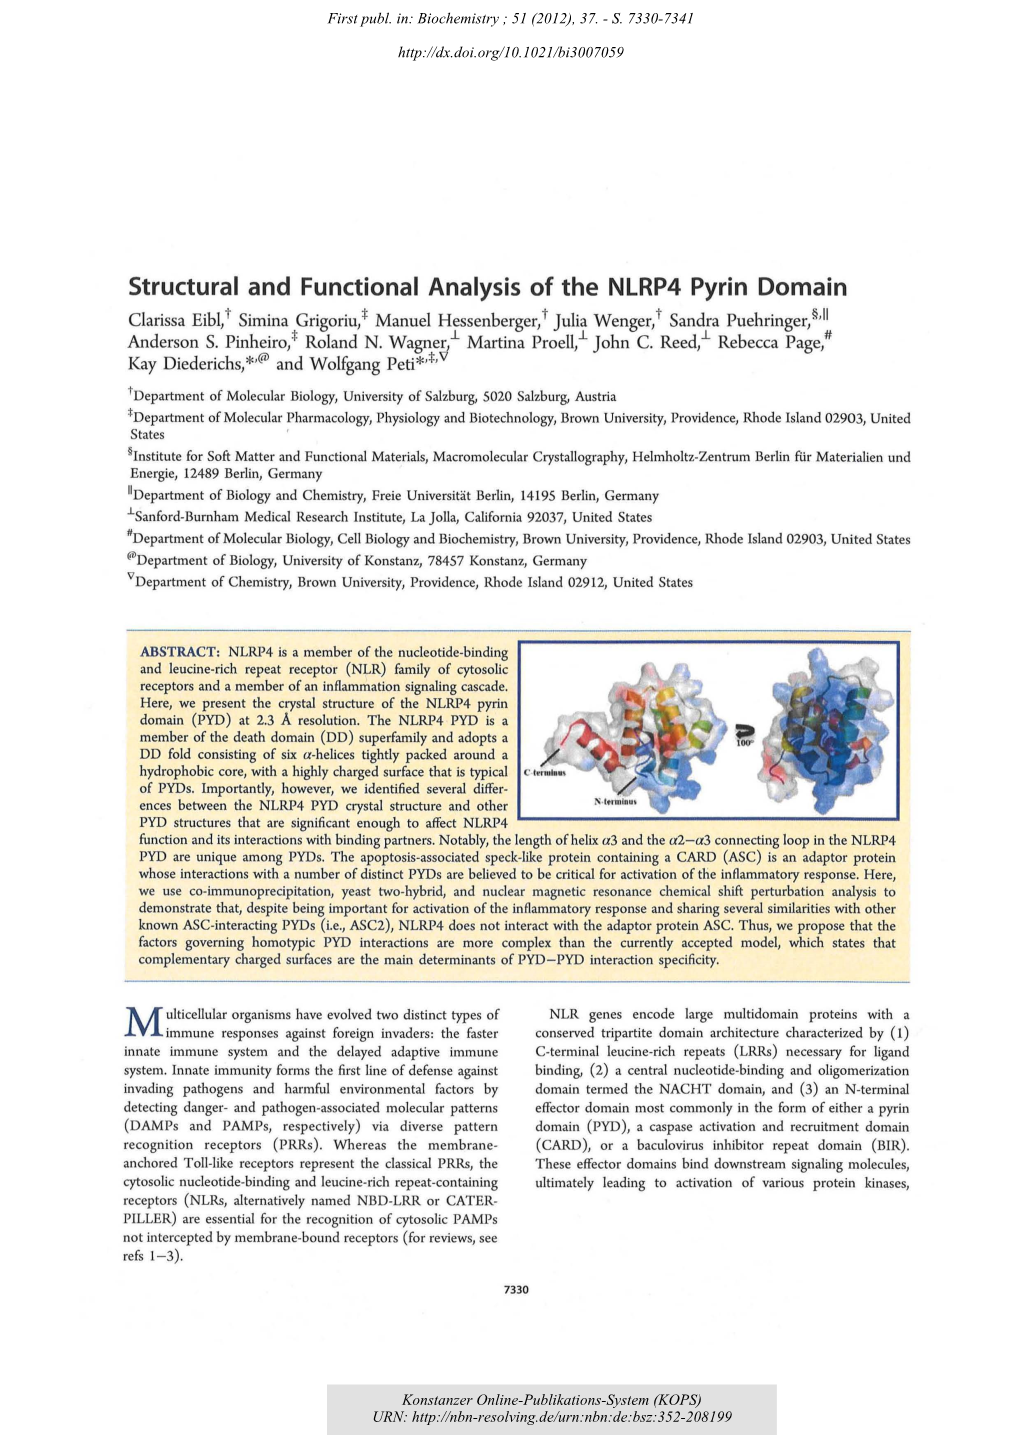 Structural and Functional Analysis of the NLRP4 Pyrin Domain